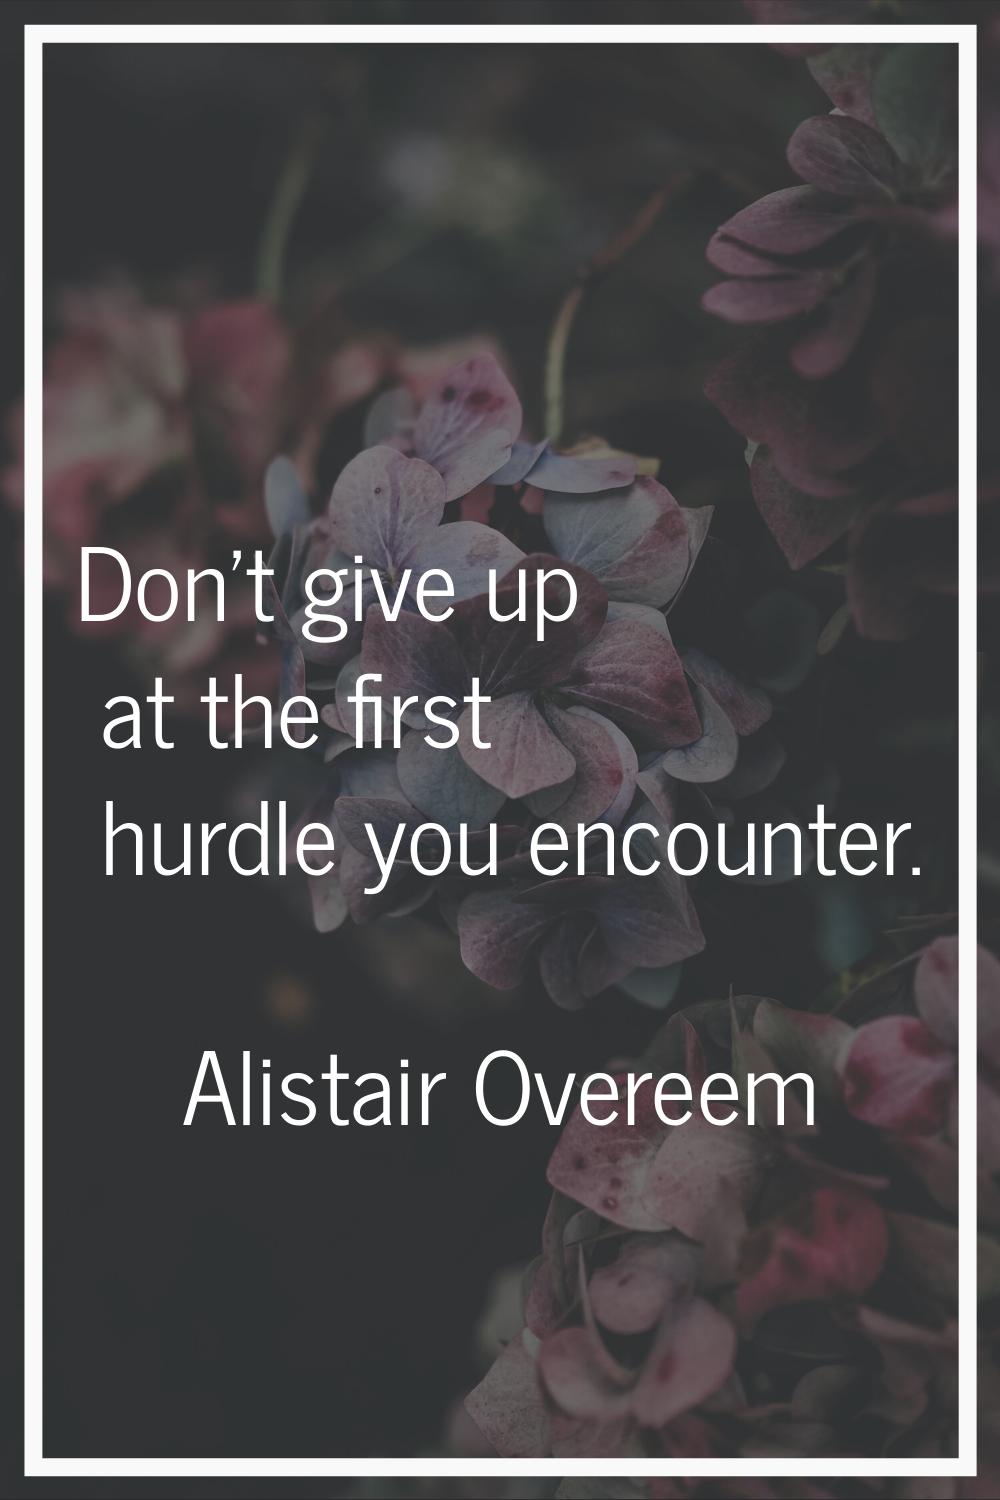 Don't give up at the first hurdle you encounter.